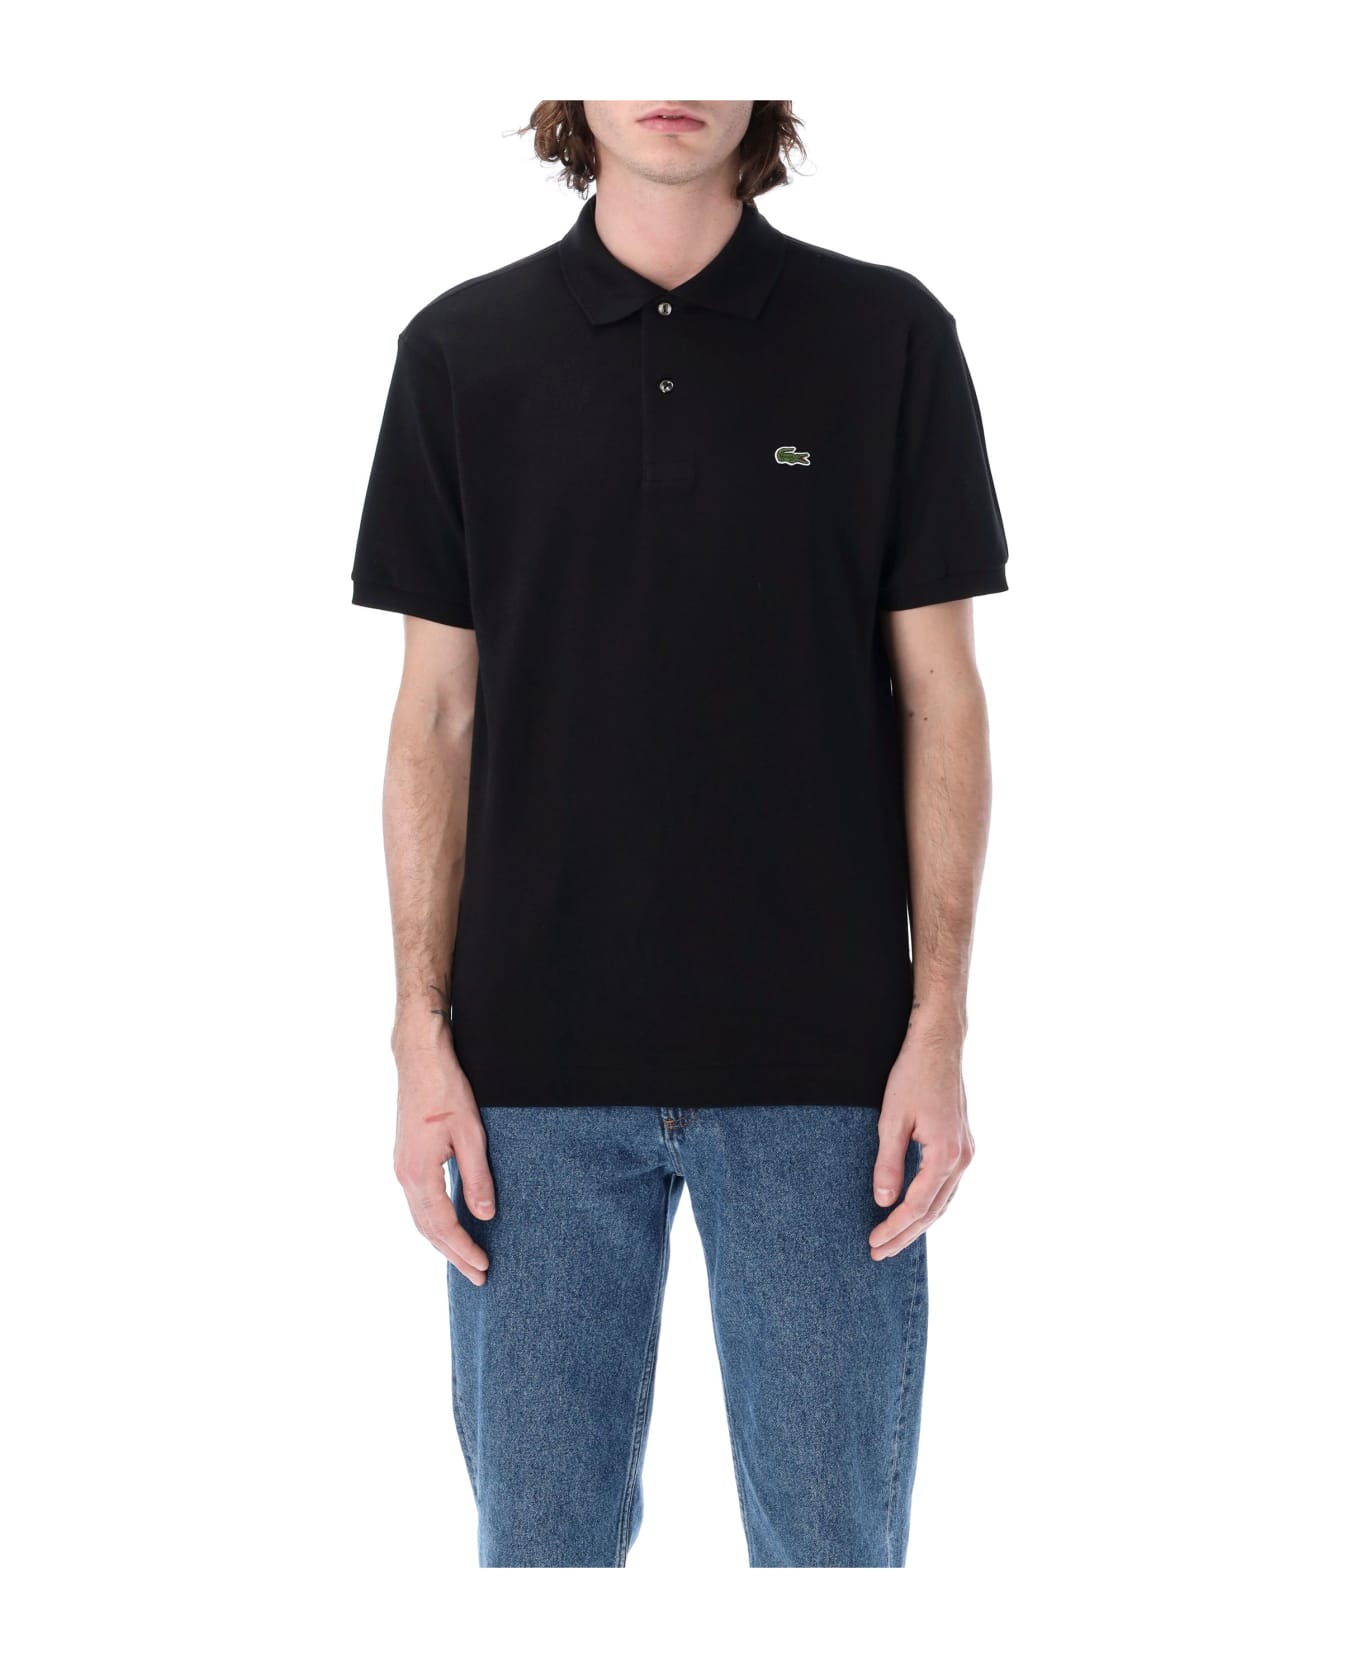 Lacoste Classic Fit Polo Shirt - BLACK